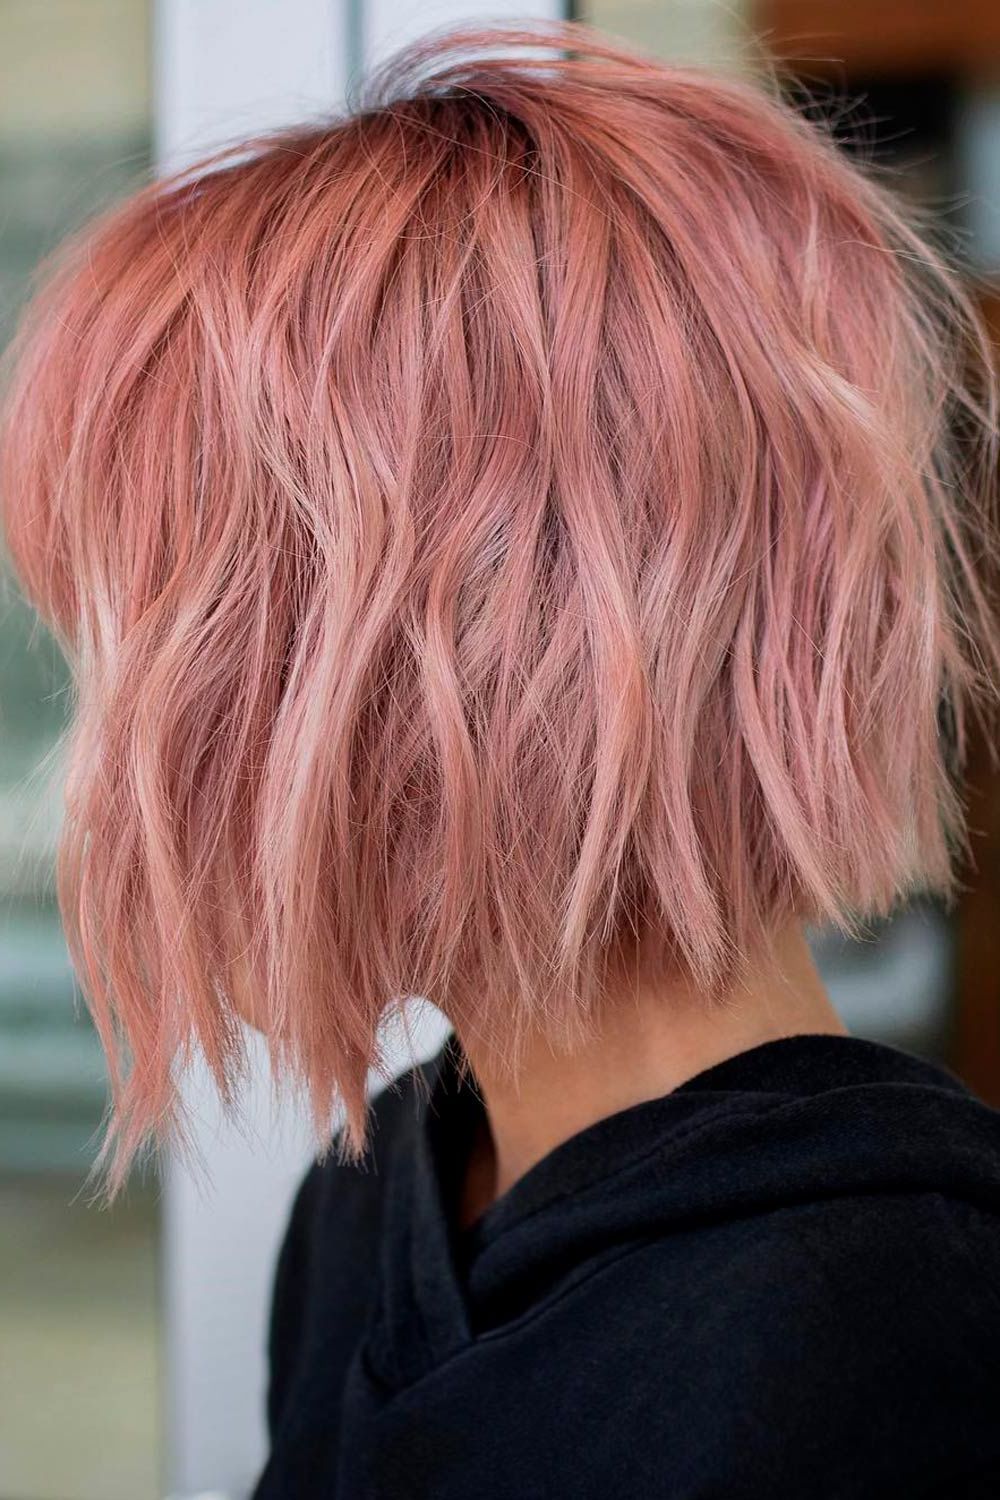 Untraditional Lob Haircut Ideas To Give A Try | Lovehairstyles Pertaining To Most Recently Pink Balayage Haircuts For Wavy Lob (Photo 8 of 25)